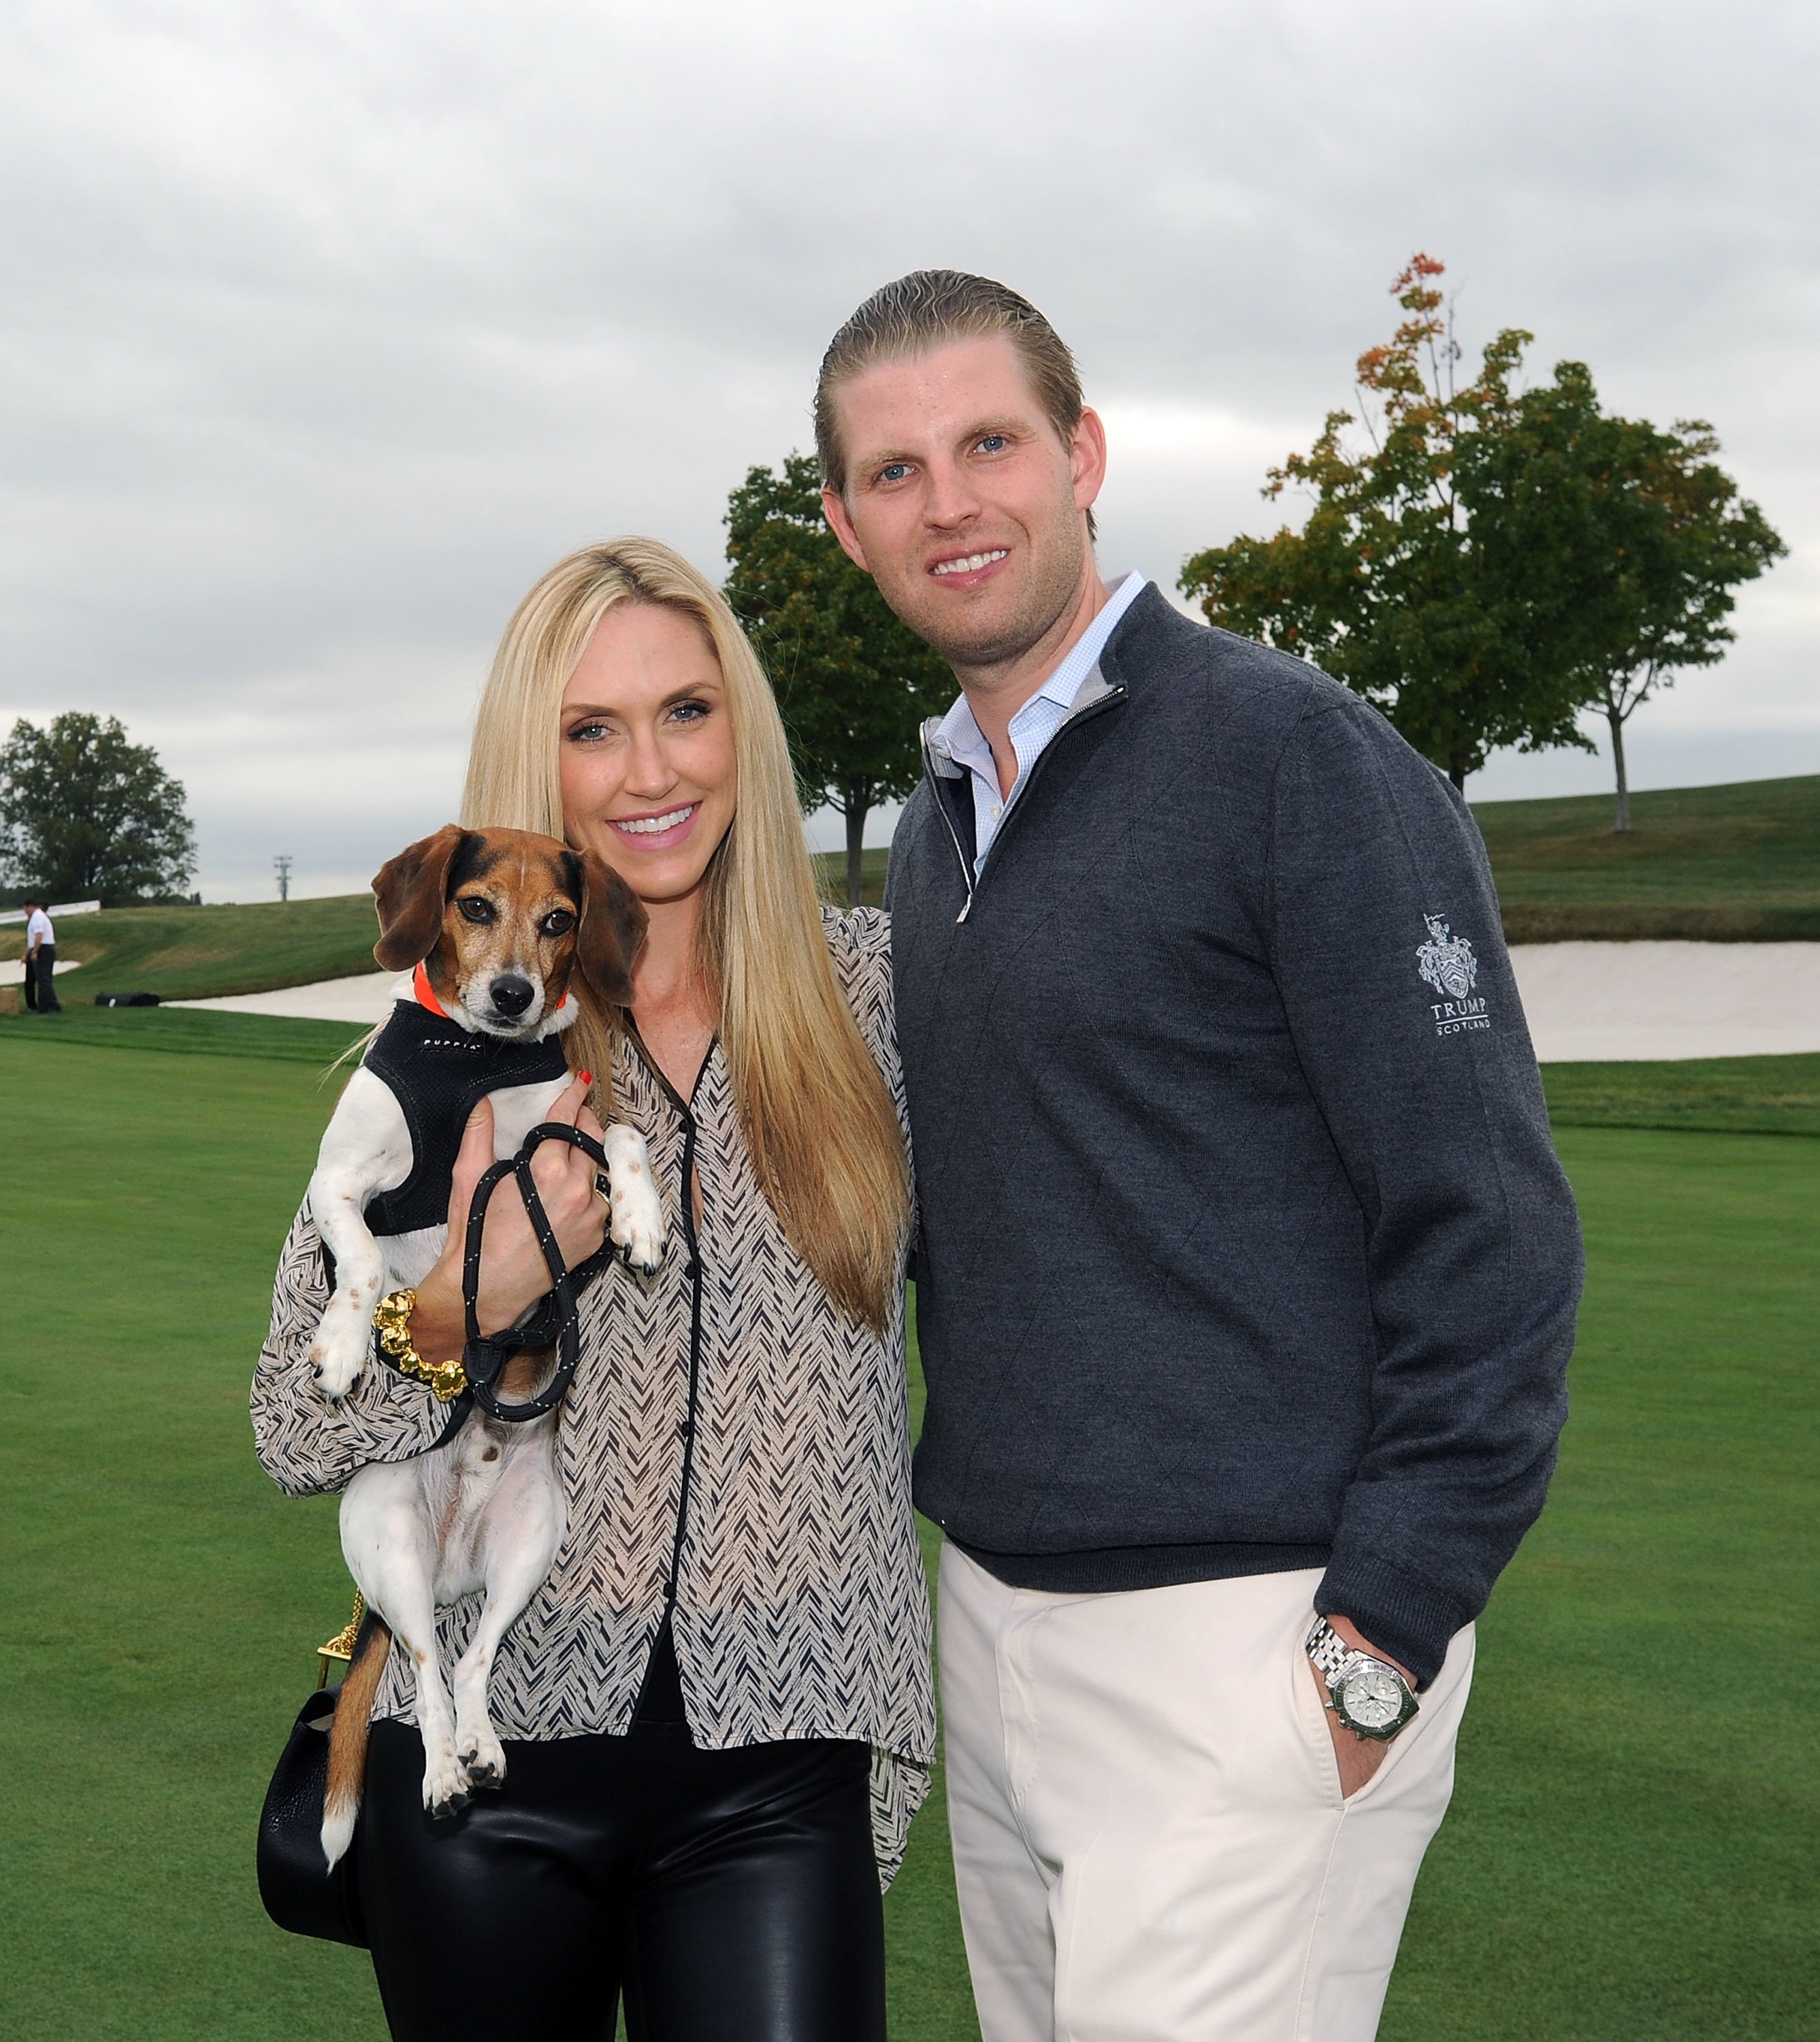 Eric Trump and Lara Trump attend the Concours d'Elegance at Trump National Golf Club on September 27, 2015 in Bedminster, New Jersey | Photo: GettyImages